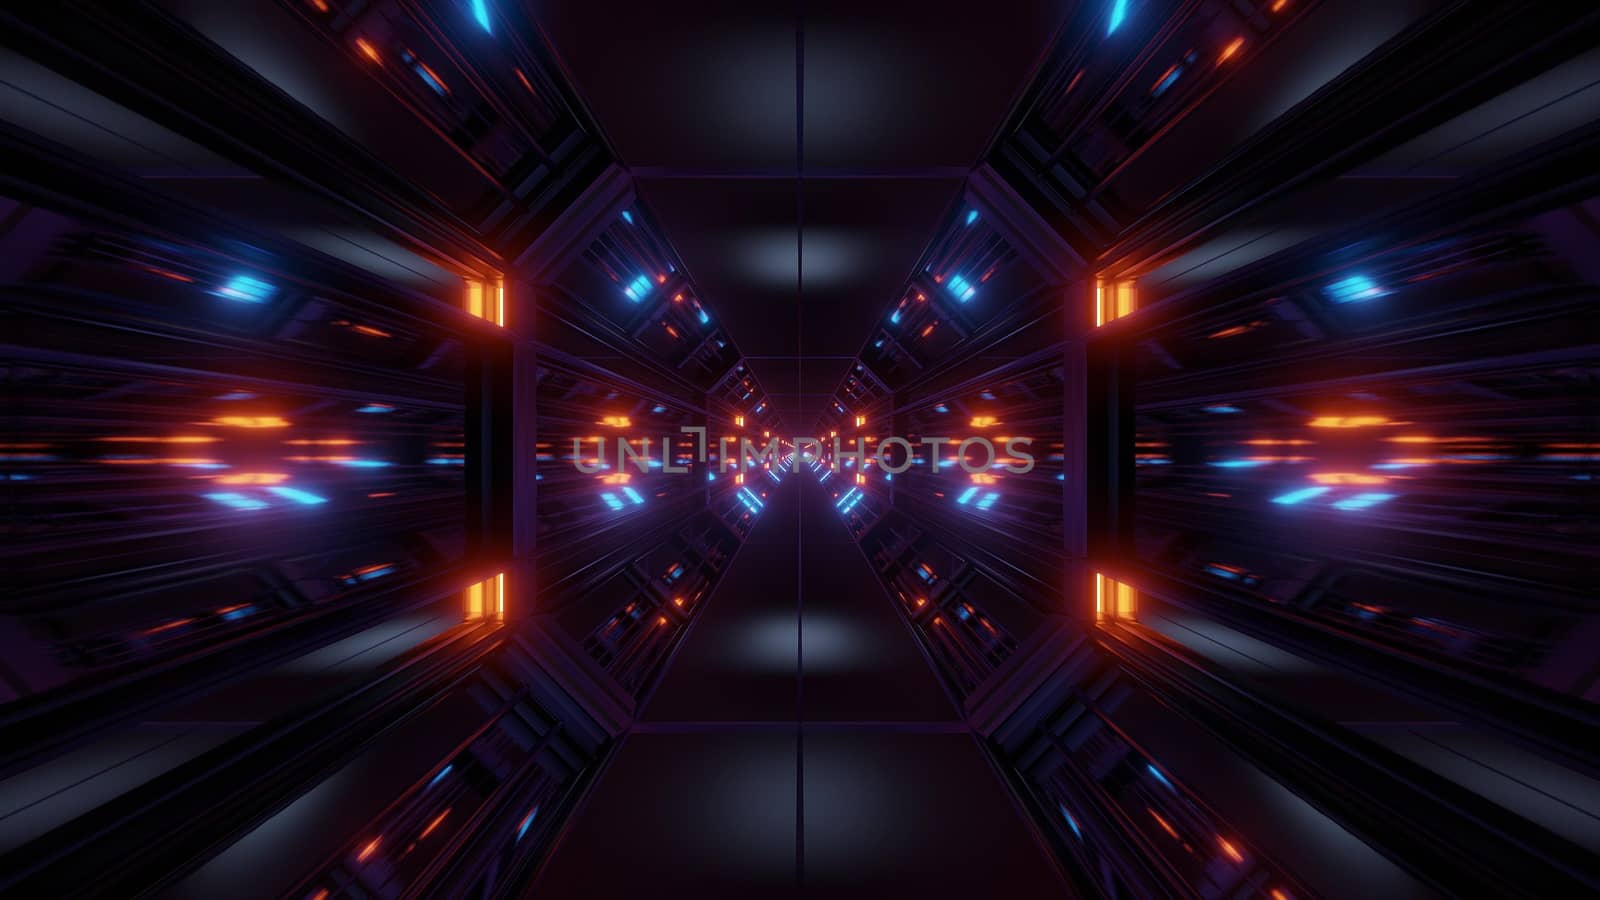 black scifi space tunnel background wallpaper with nice glow 3d rendering, 3d illustration of a space shit hangar corridor with nice glow